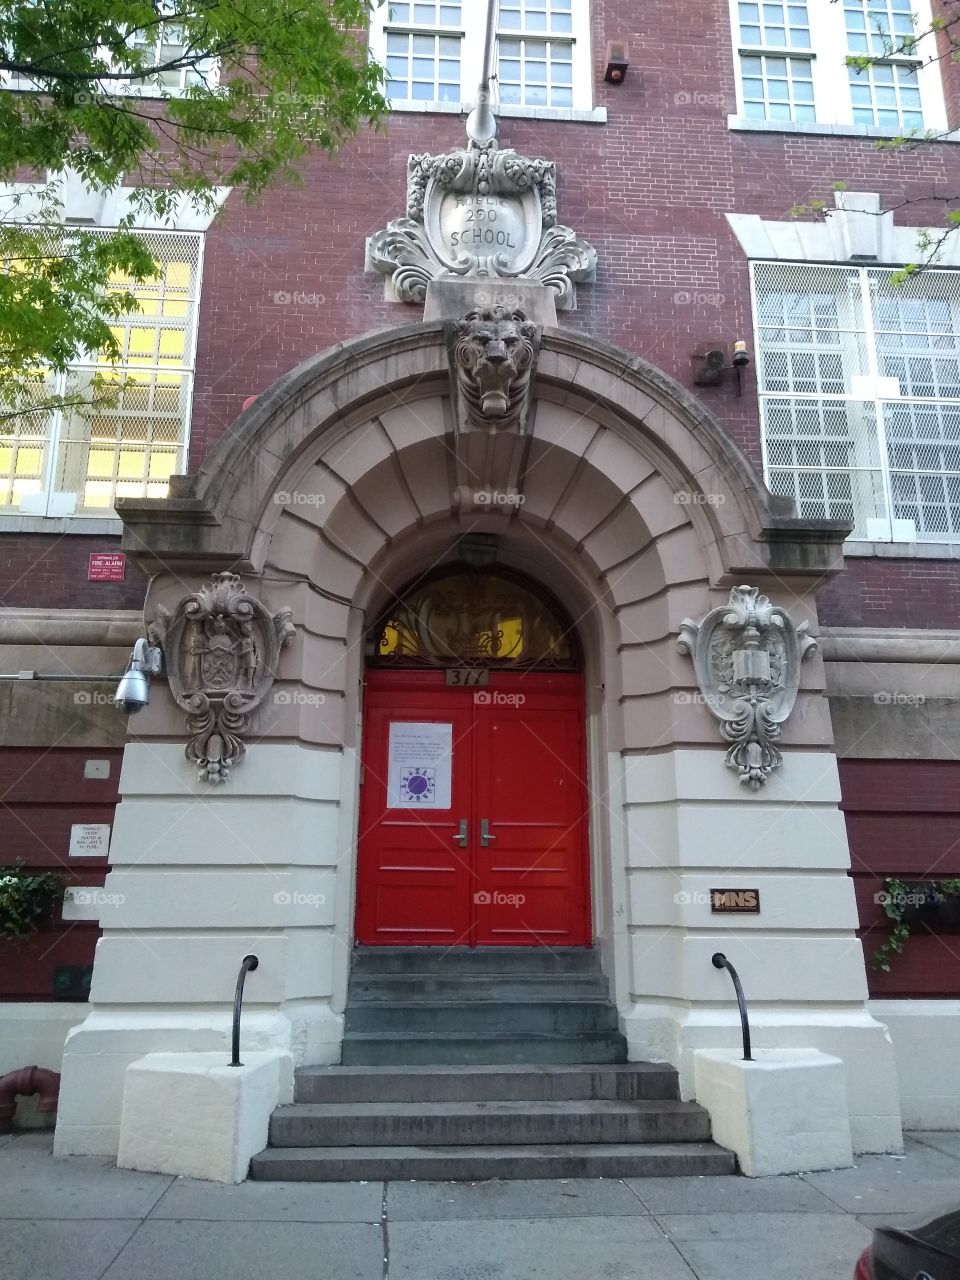 Entrance to a School in NYC